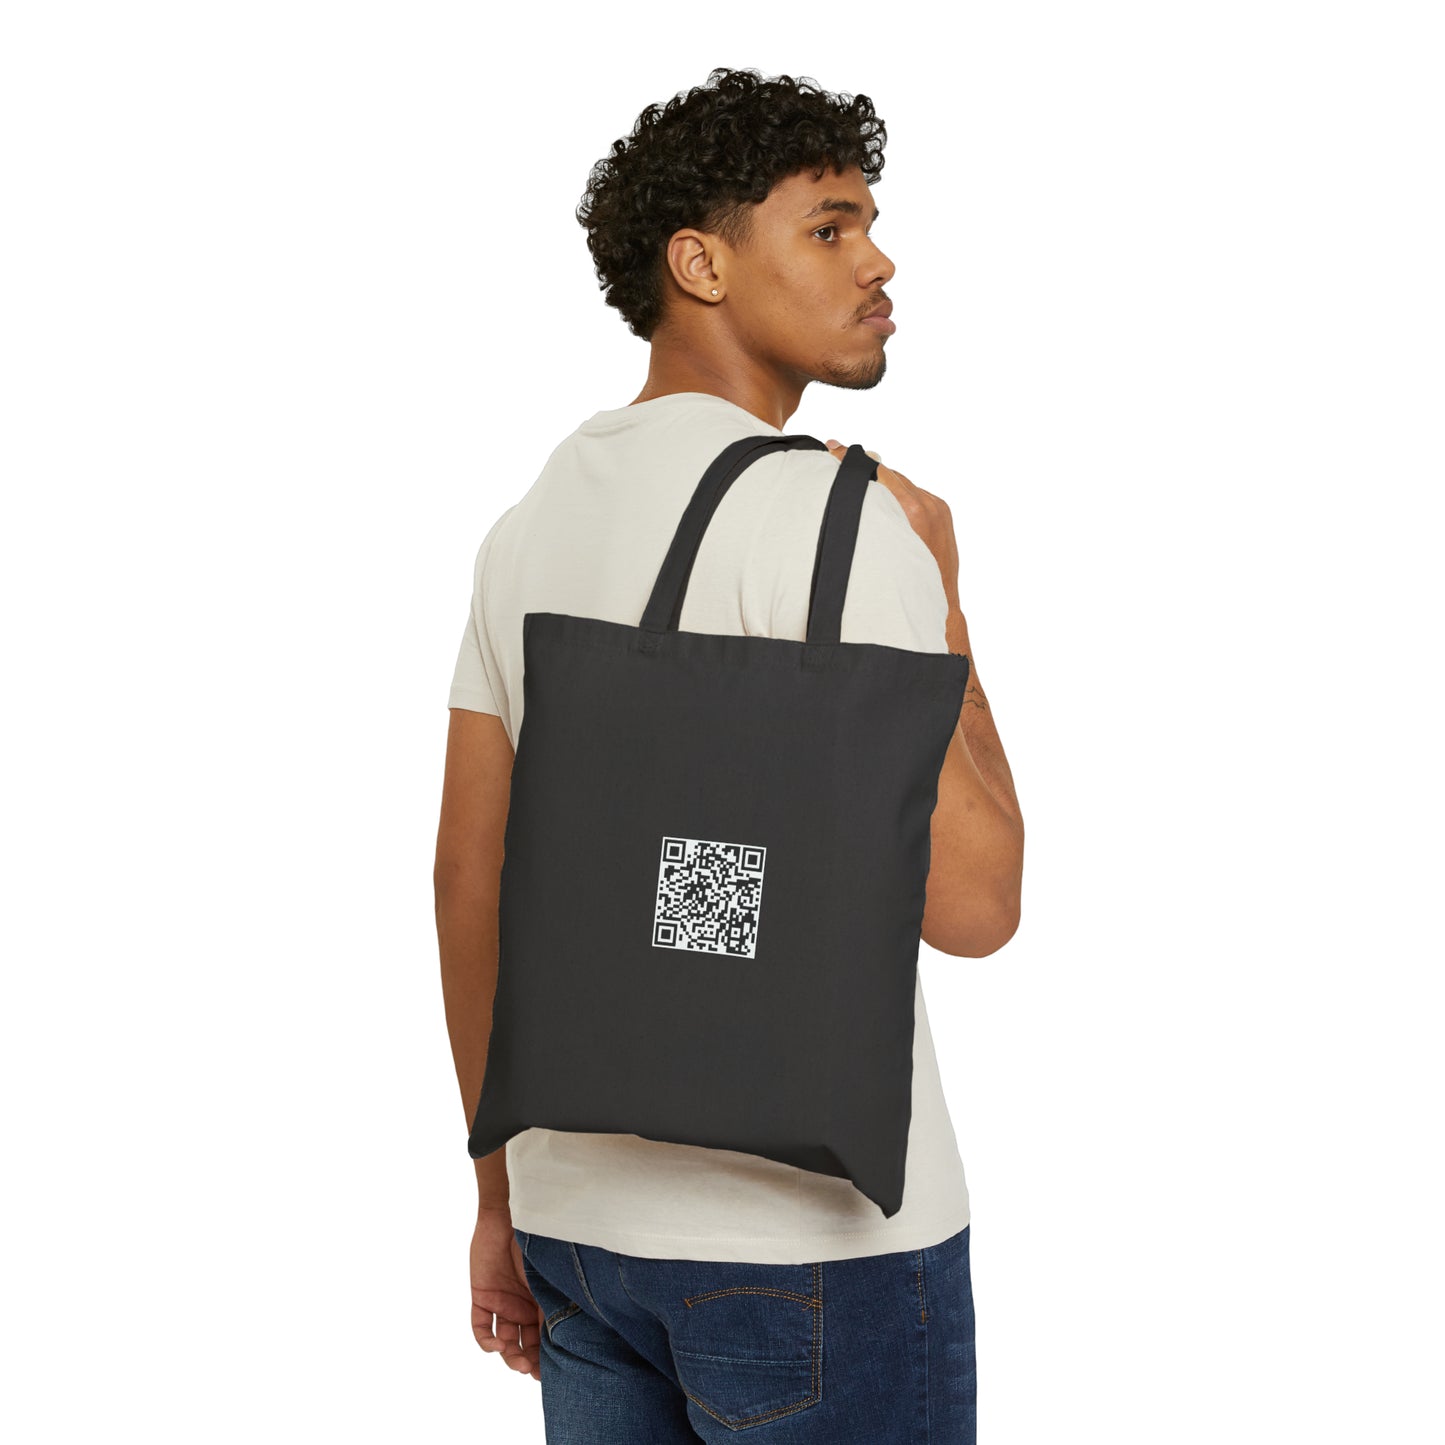 Little Ricky's Ambition - Cotton Canvas Tote Bag